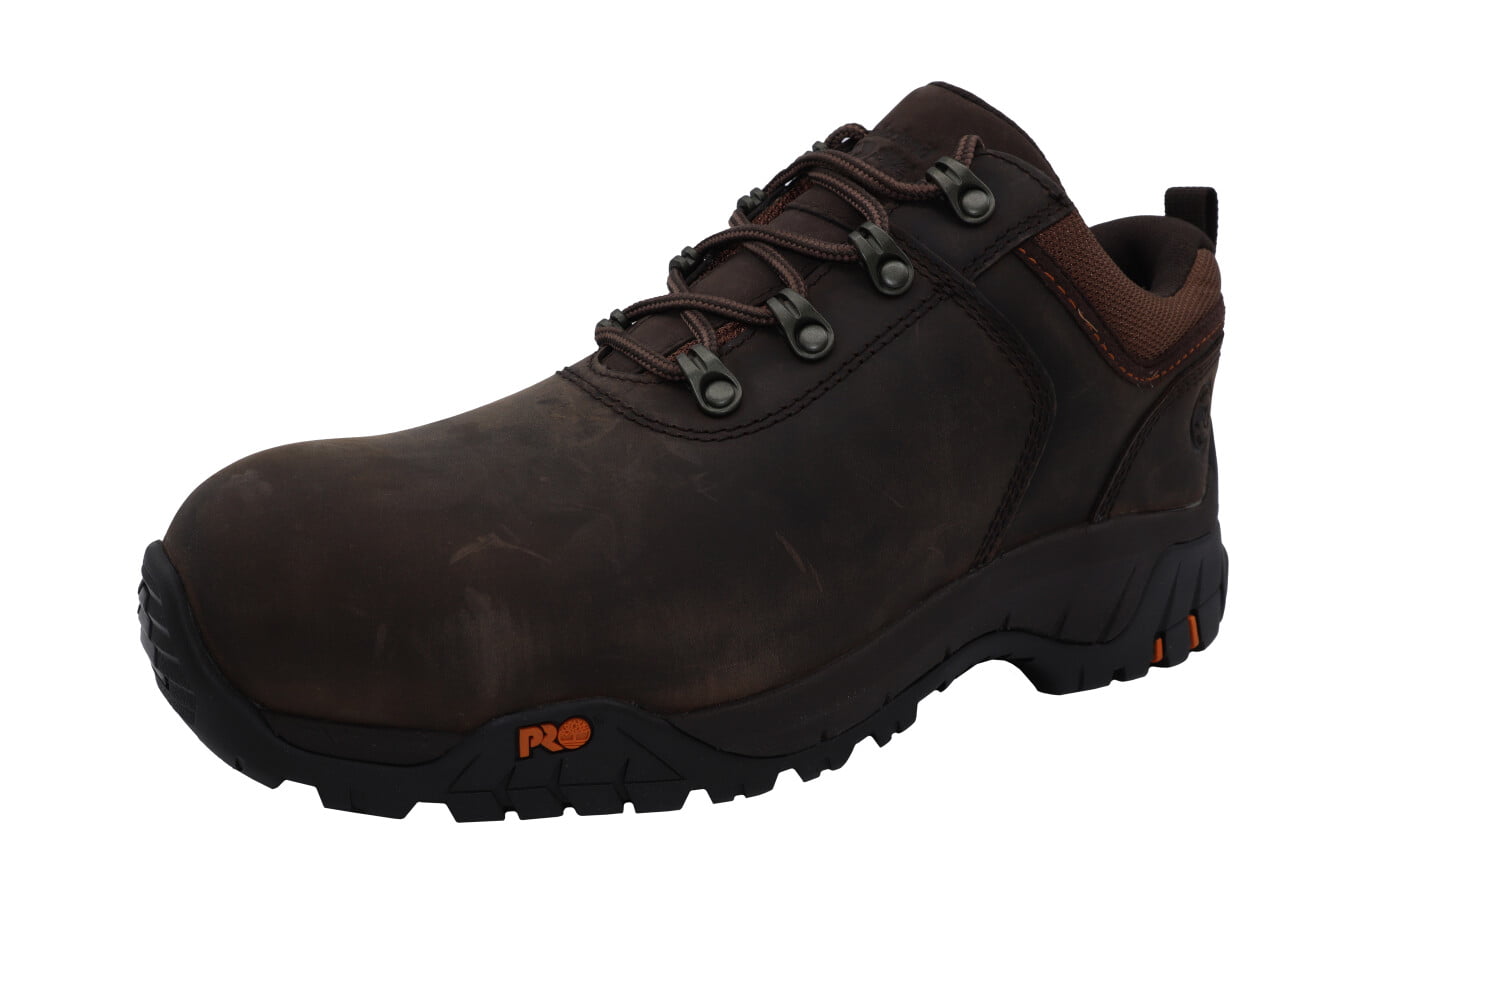 timberland pro outroader